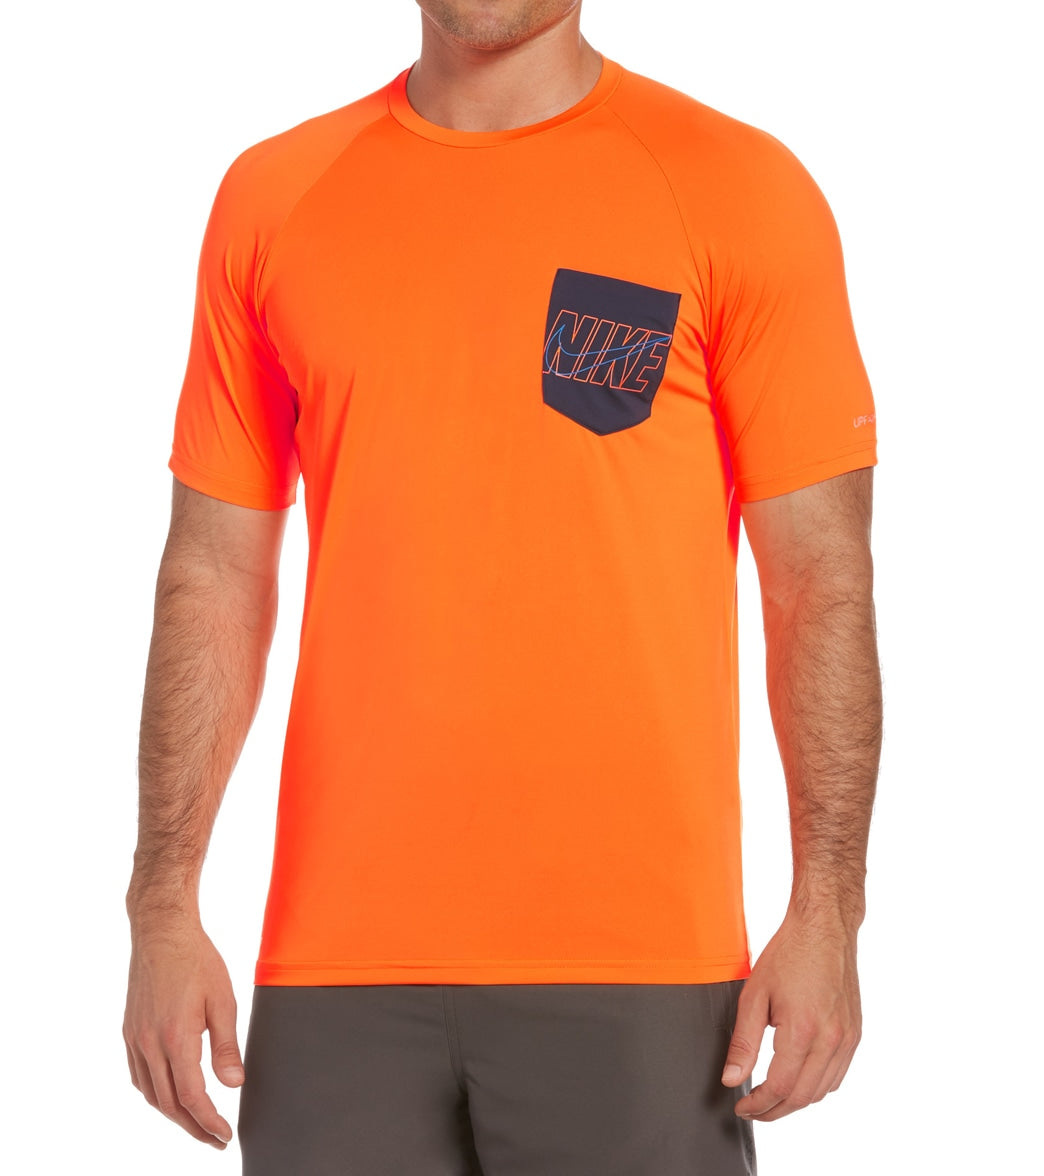 Escribe email Monumento asentamiento Nike Men's Outline Logo Short Sleeve Hydroguard at SwimOutlet.com